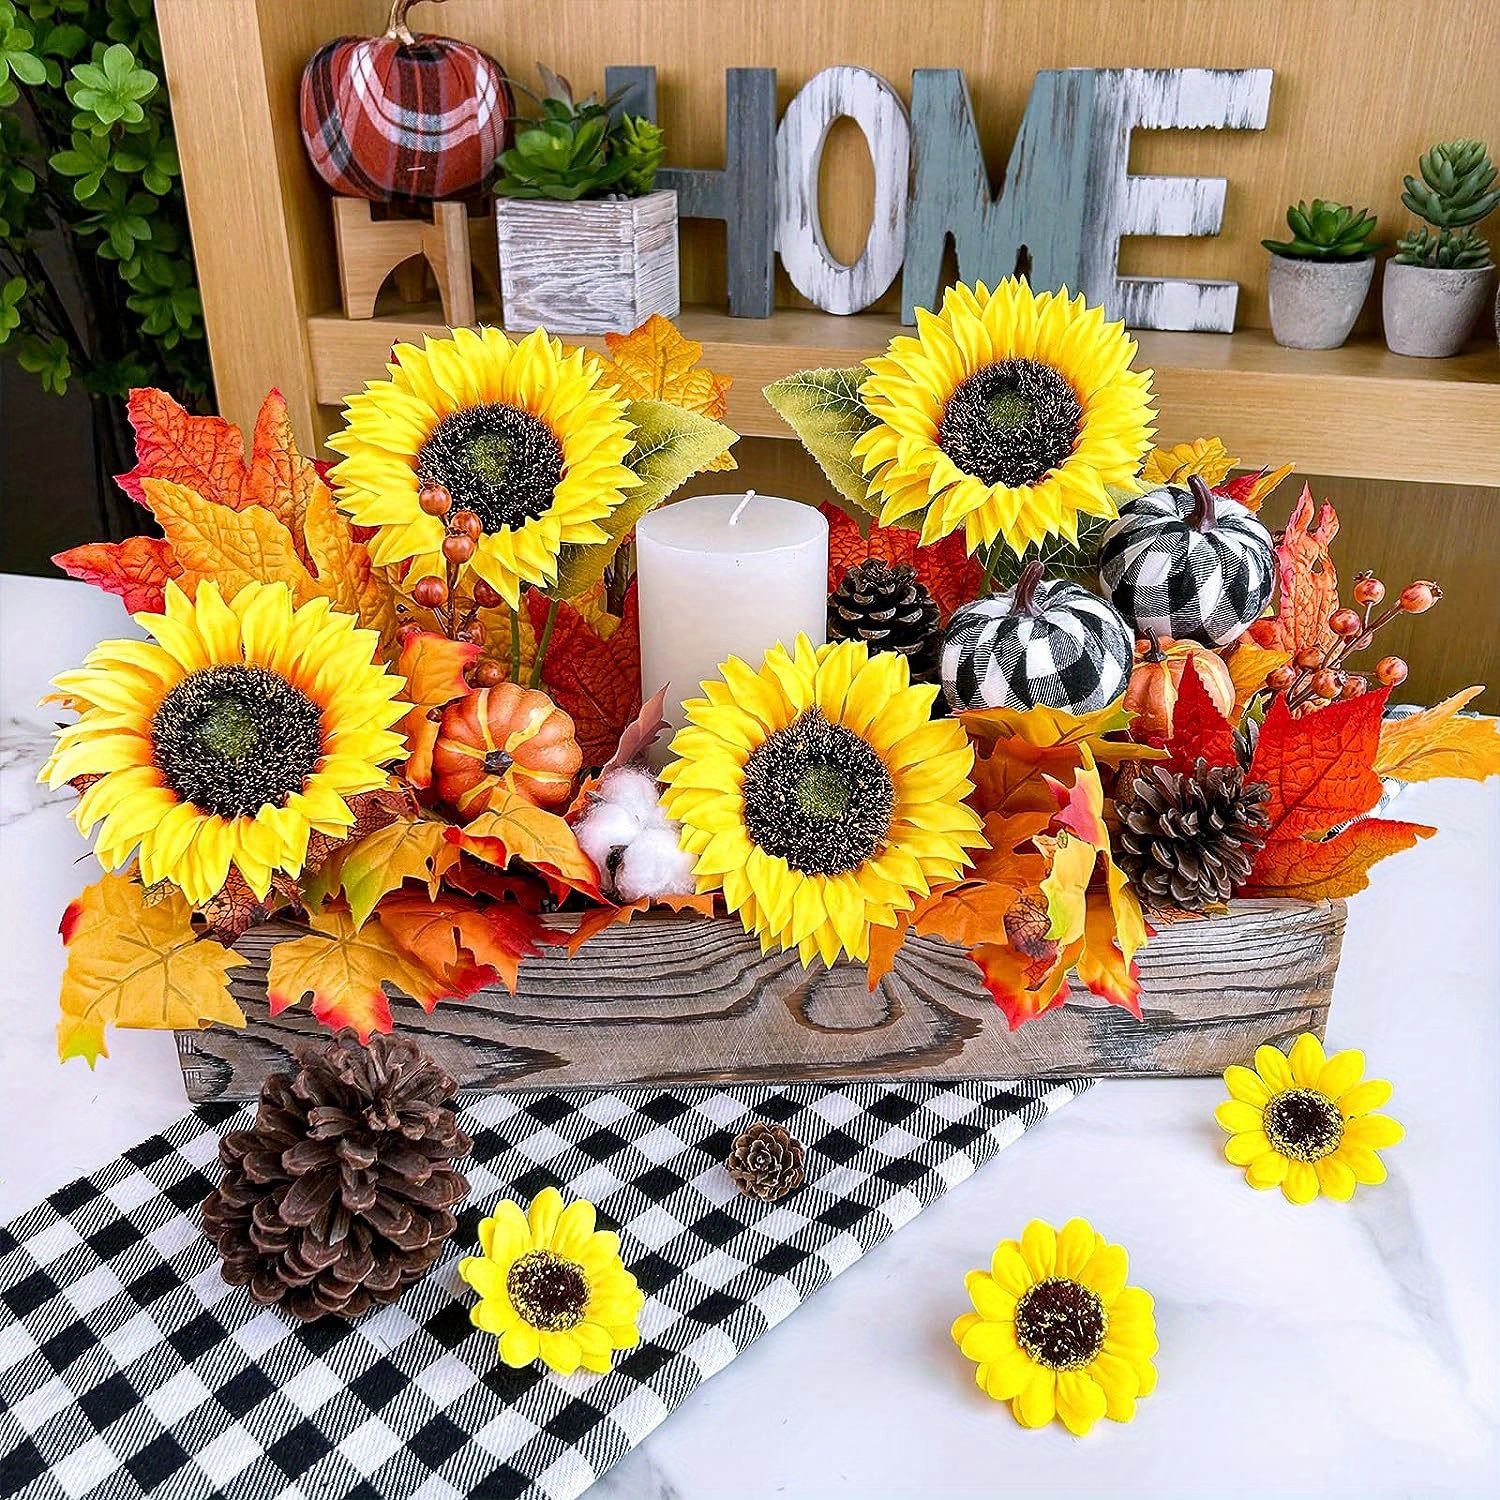  Large Sunflowers Artificial Flowers 8 Full Bloom Long Stem  Artificial Sunflower 33 Tall Sun Flowers Giant Silk Sunflowers with Stem  Fake Sunflower Floral Arrangement for Home Wedding Decoration : Home 